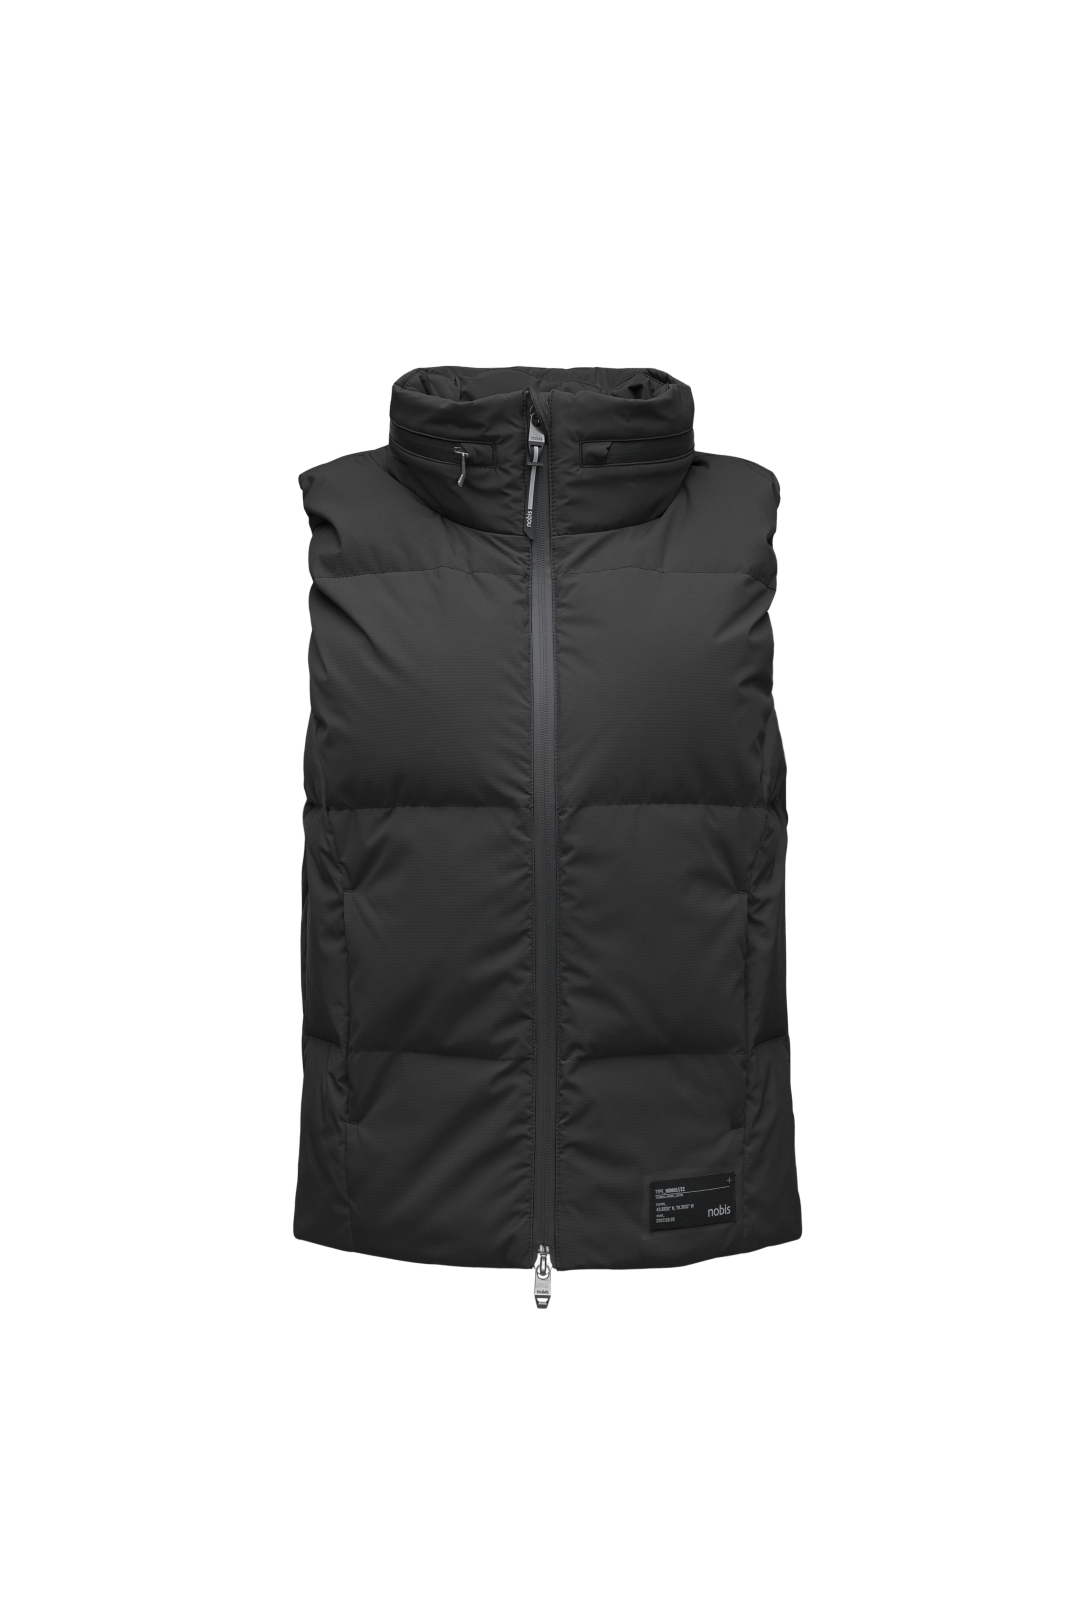 Oren Ladies Performance Vest in hip length, Durable Stretch Ripstop and 3-Ply Micro Denier fabrication, Premium Canadian White Duck Down insulation, tuck-away waterproof hood, and two-way centre front zipper, in Black